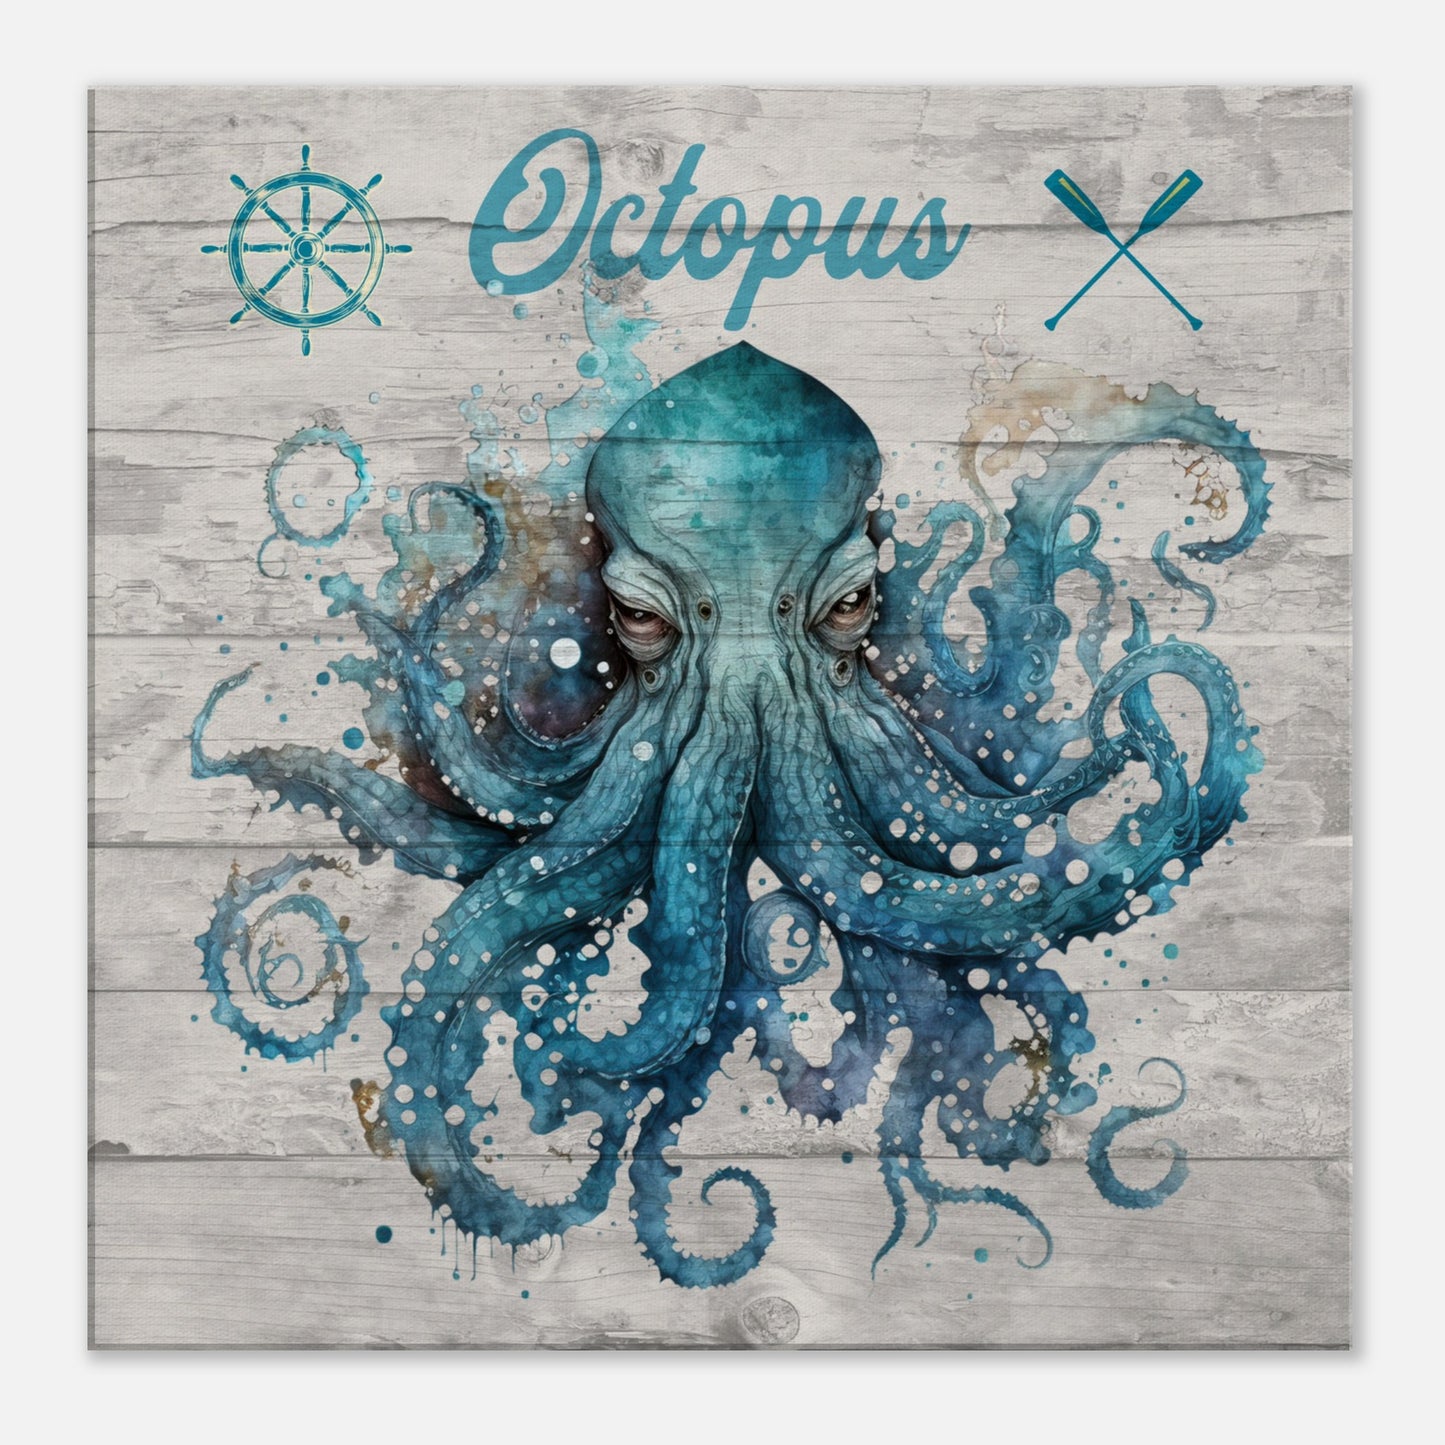 Octopus Canvas Wall Print by Caribbean Rays